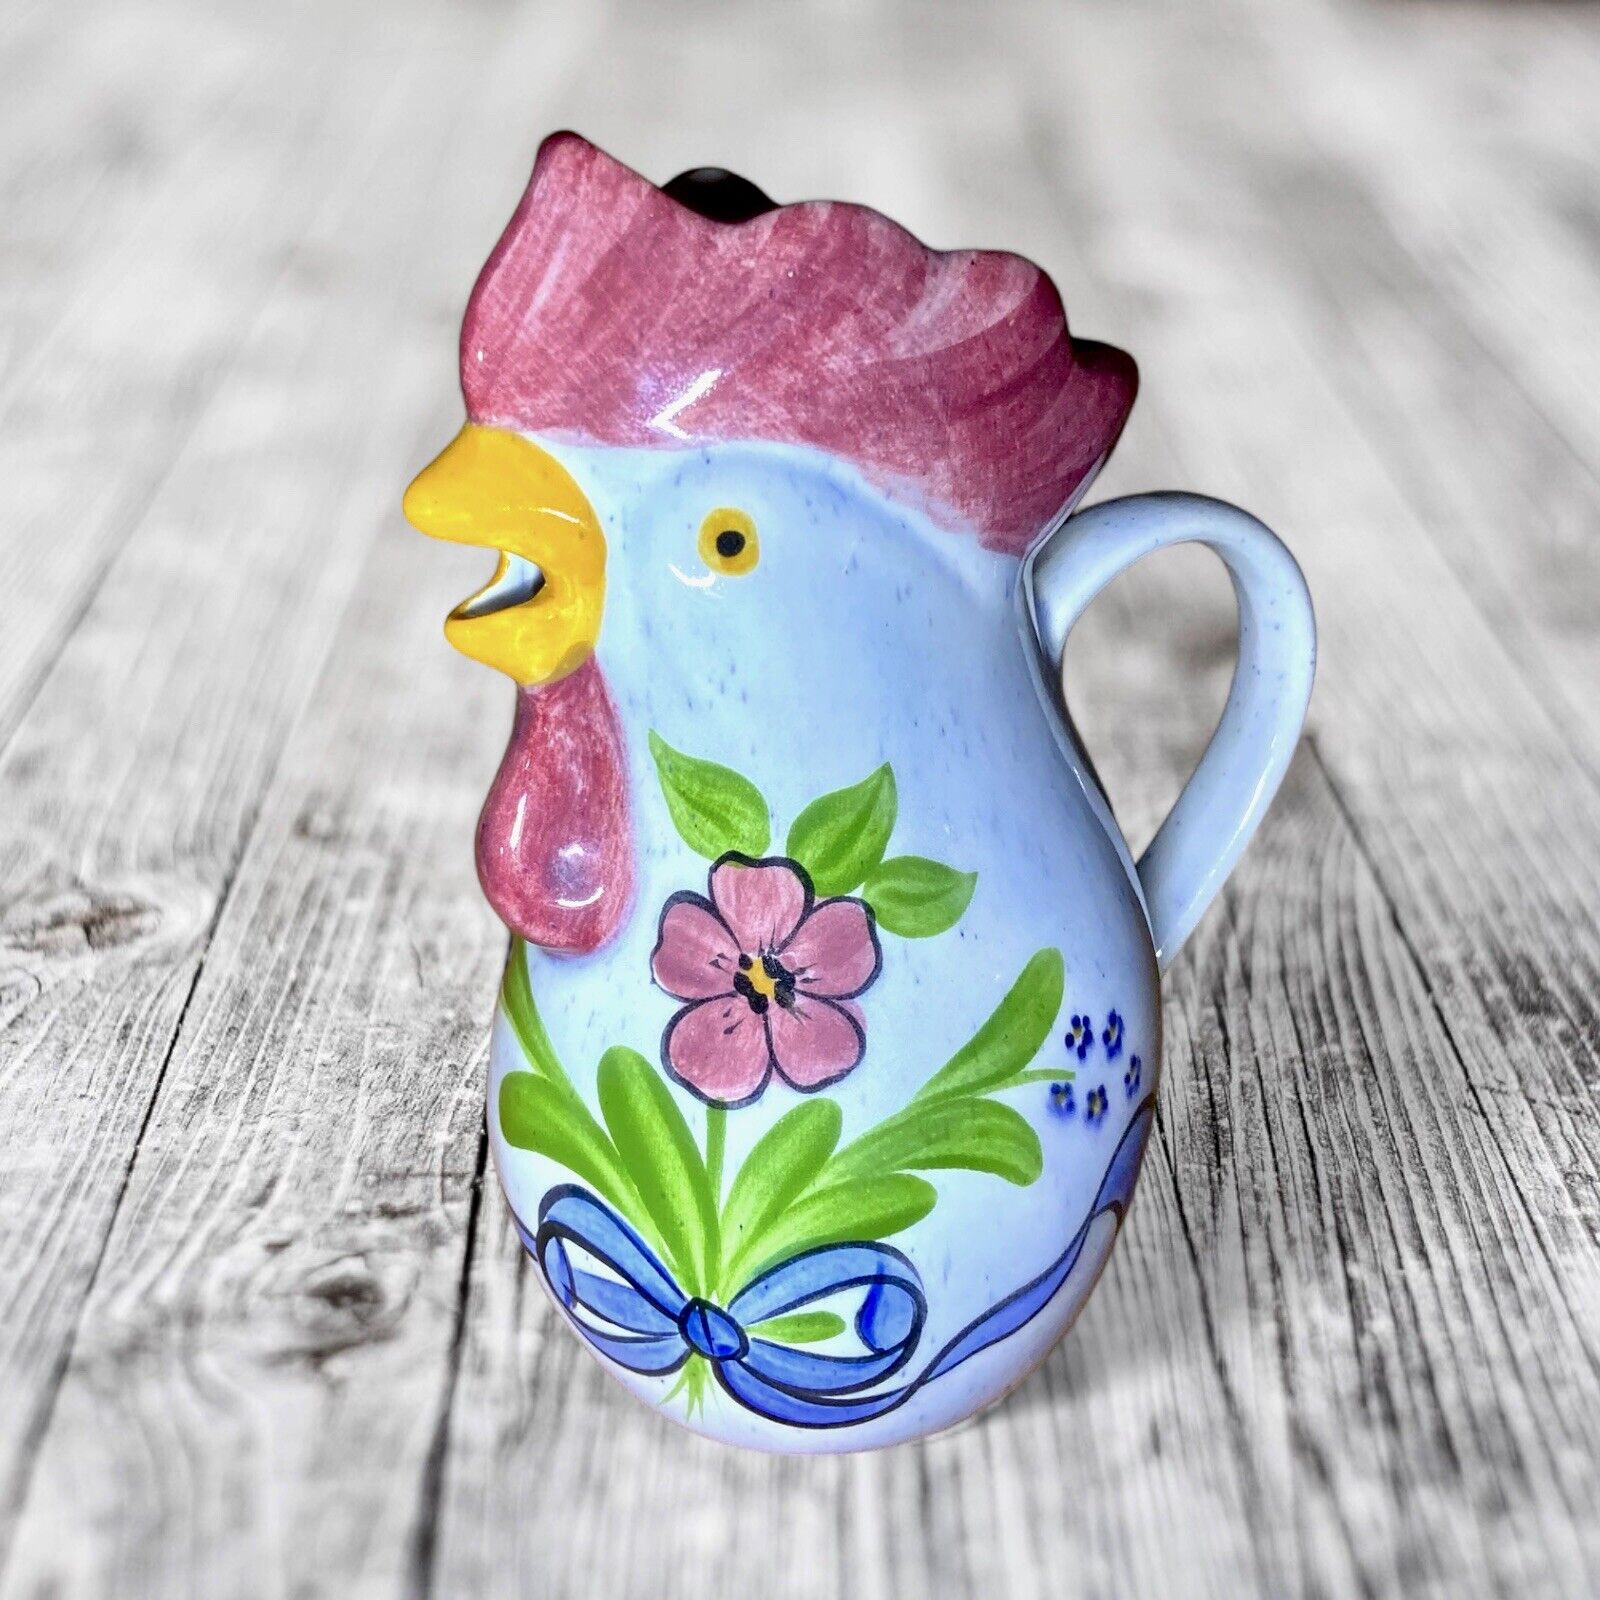 Vintage N.S. Gustin Pottery Ceramic Hand Painted Floral Rooster Creamer/Pitcher